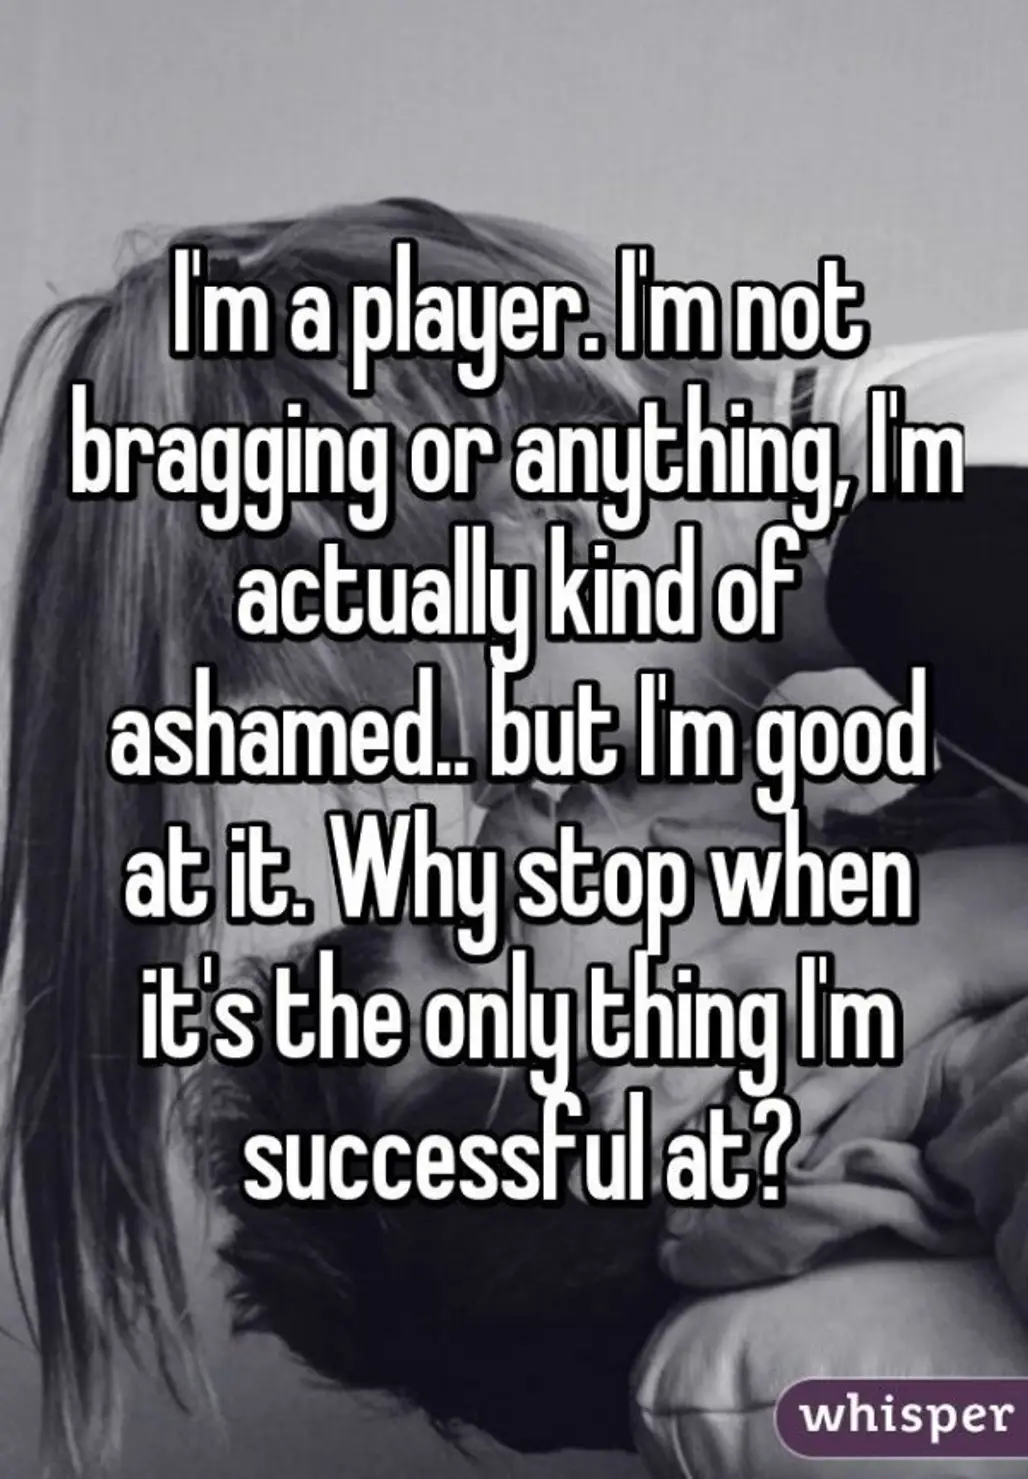 I'm Just Successful at Being a Player